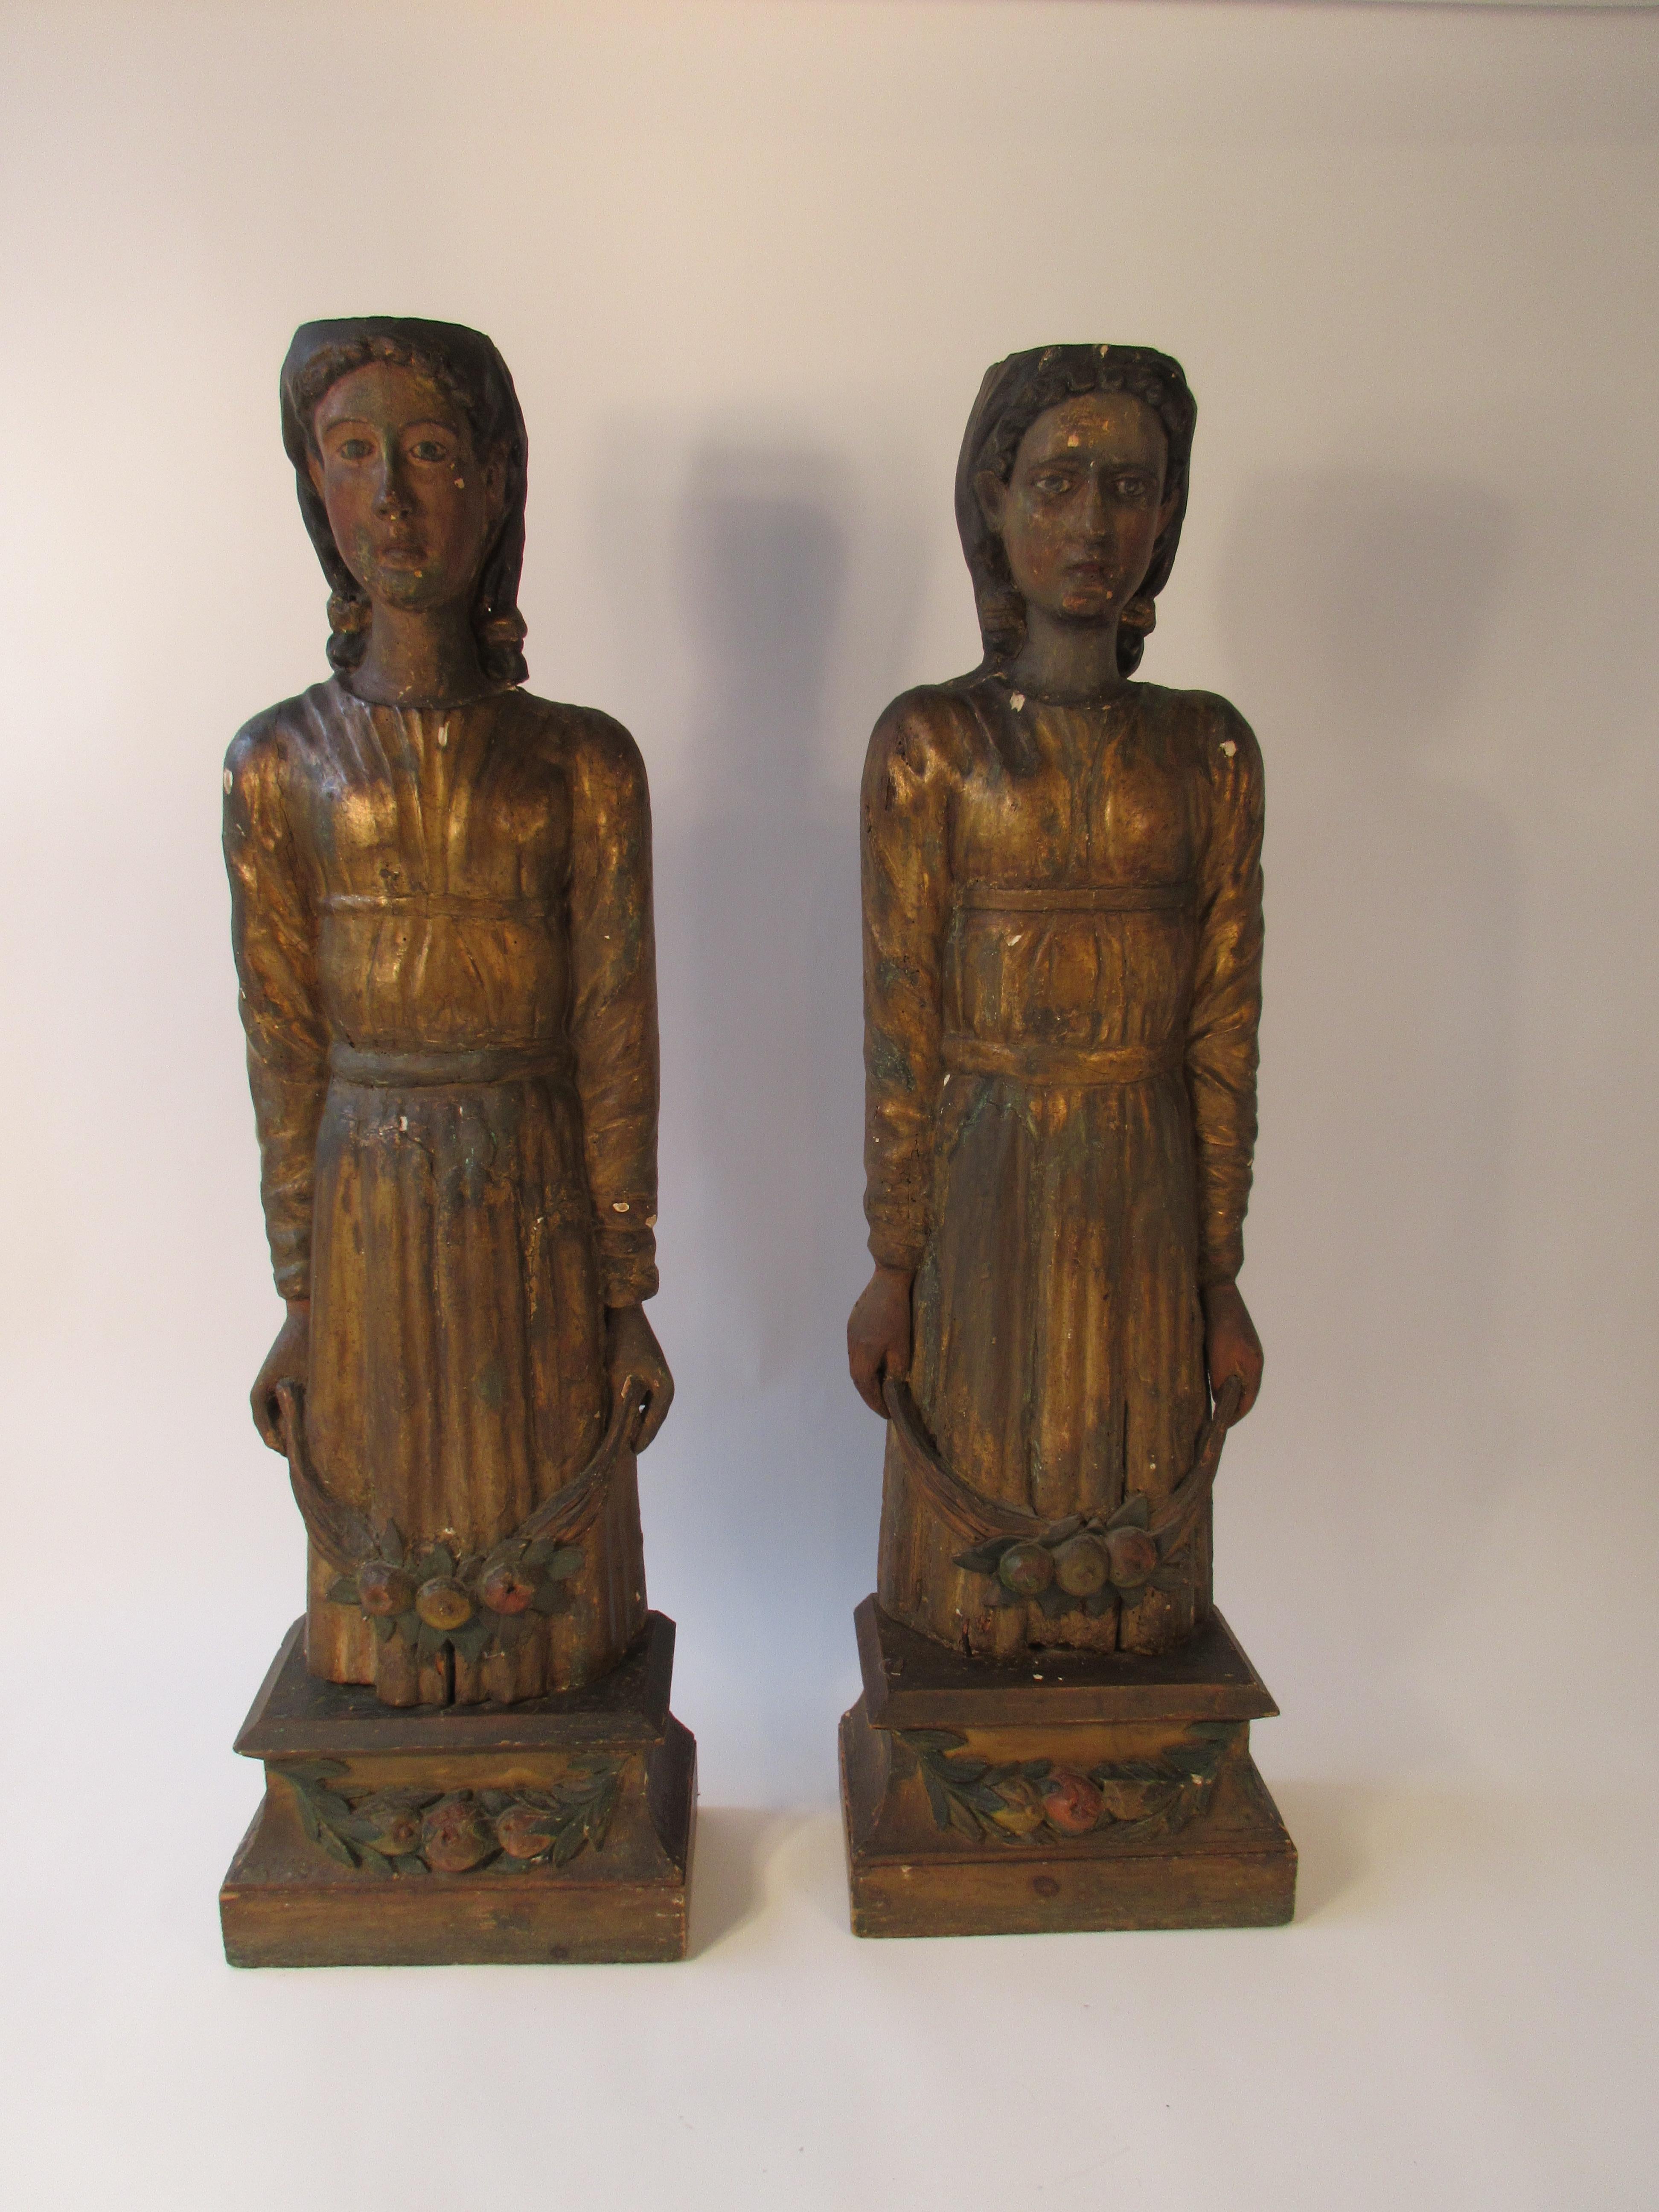 Hand carved wood Venetian figures off of the inside of a theatre in Venice from the 1840s. Gilded and painted.